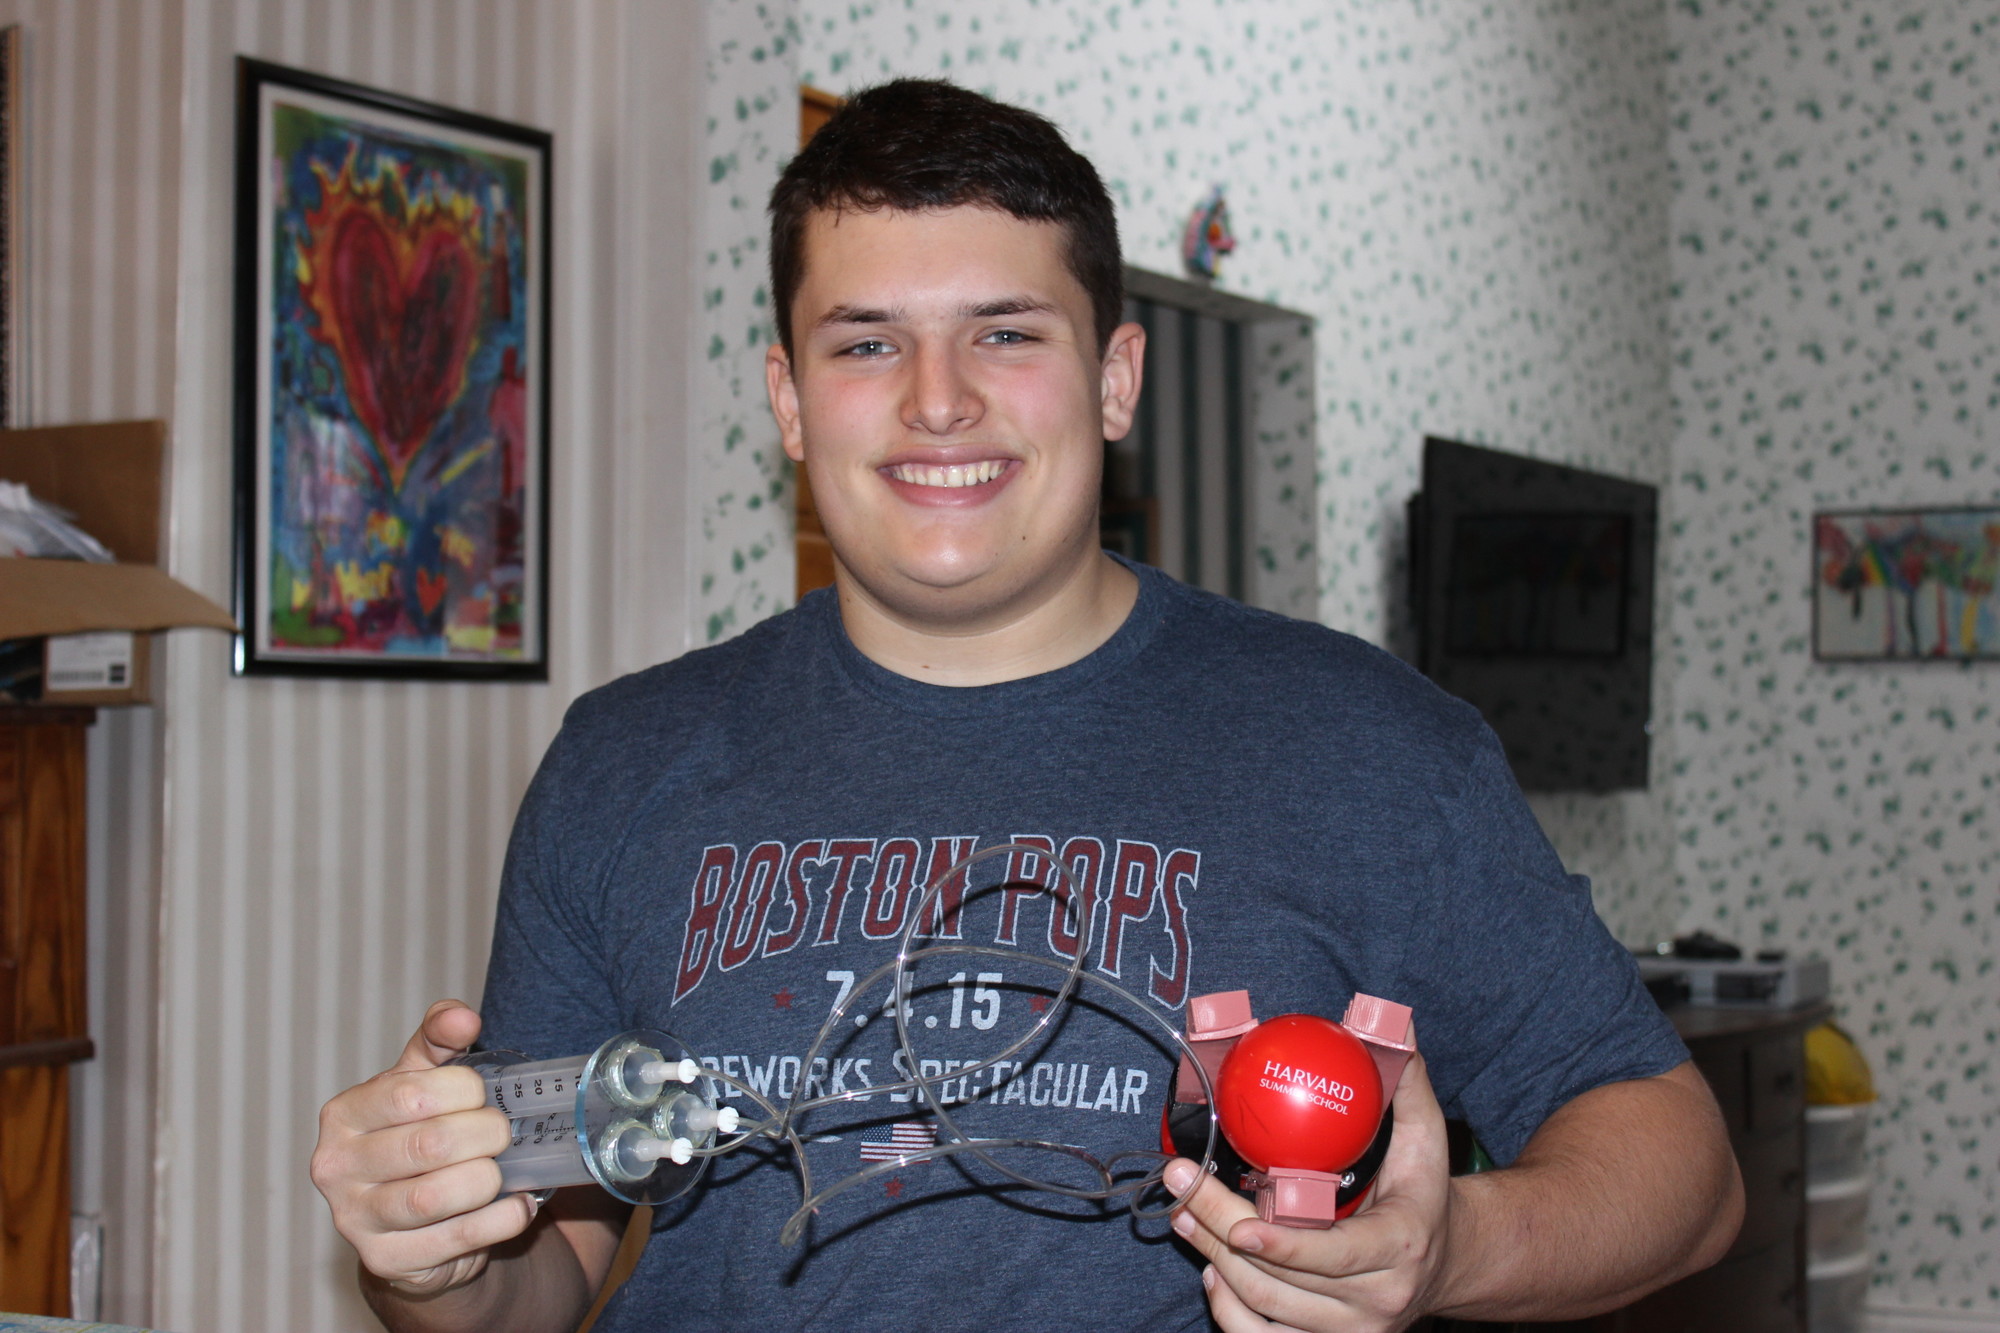 Andrew Meersand, 17, built a soft robotic grasper he developed that earned him semifinalist status in Intel’s Science Talent Search.